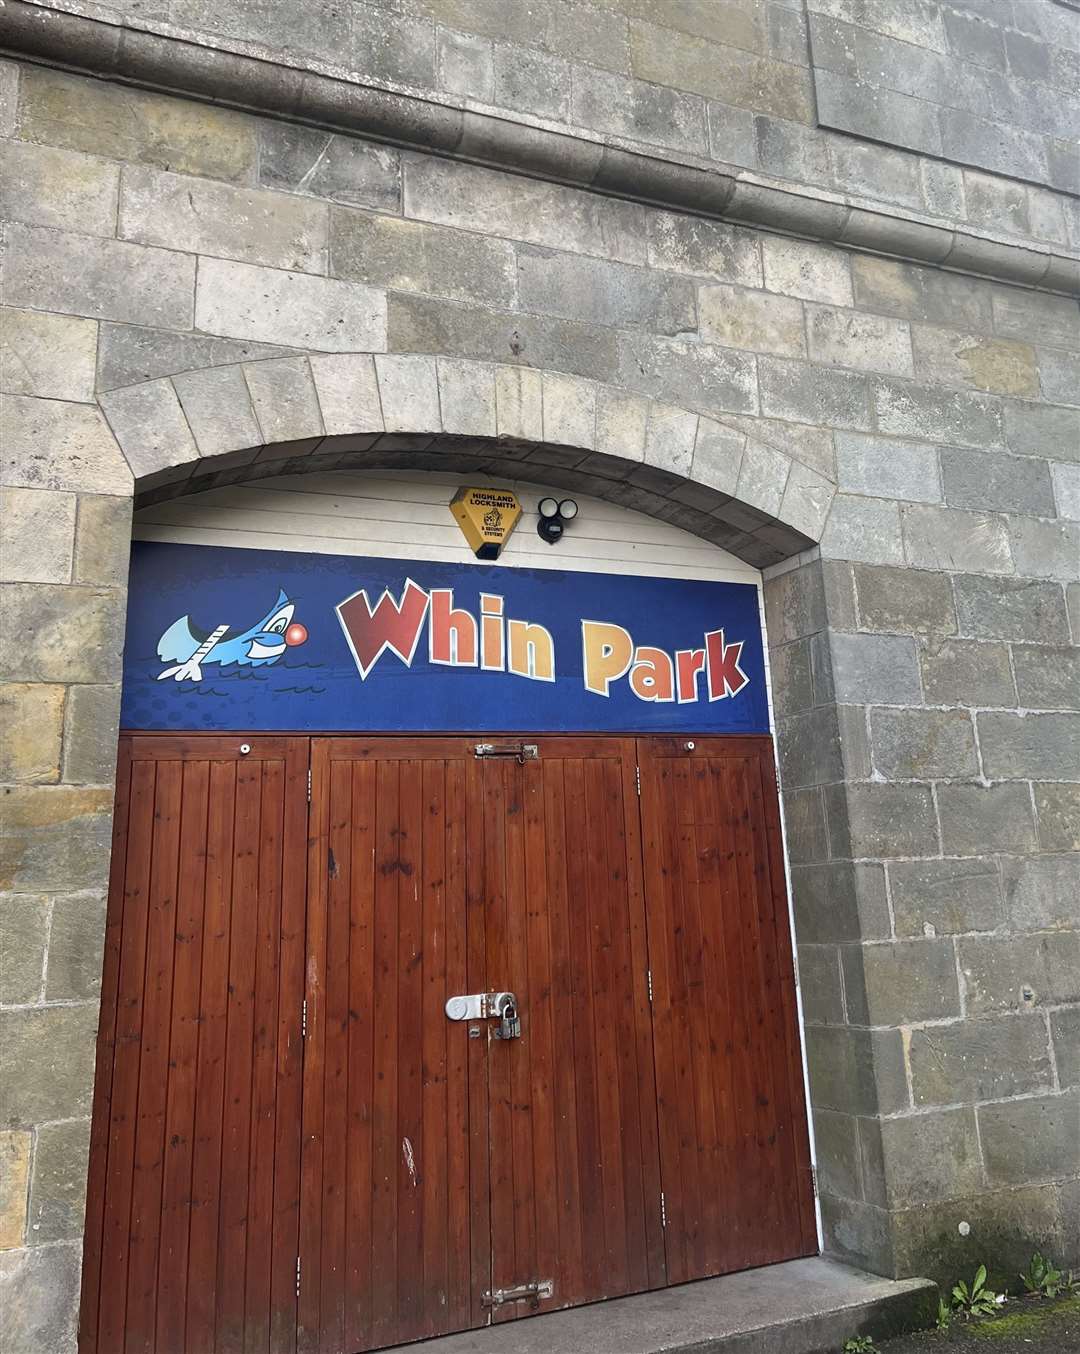 The owners of the café at Whin Park say they have had a difficult year.